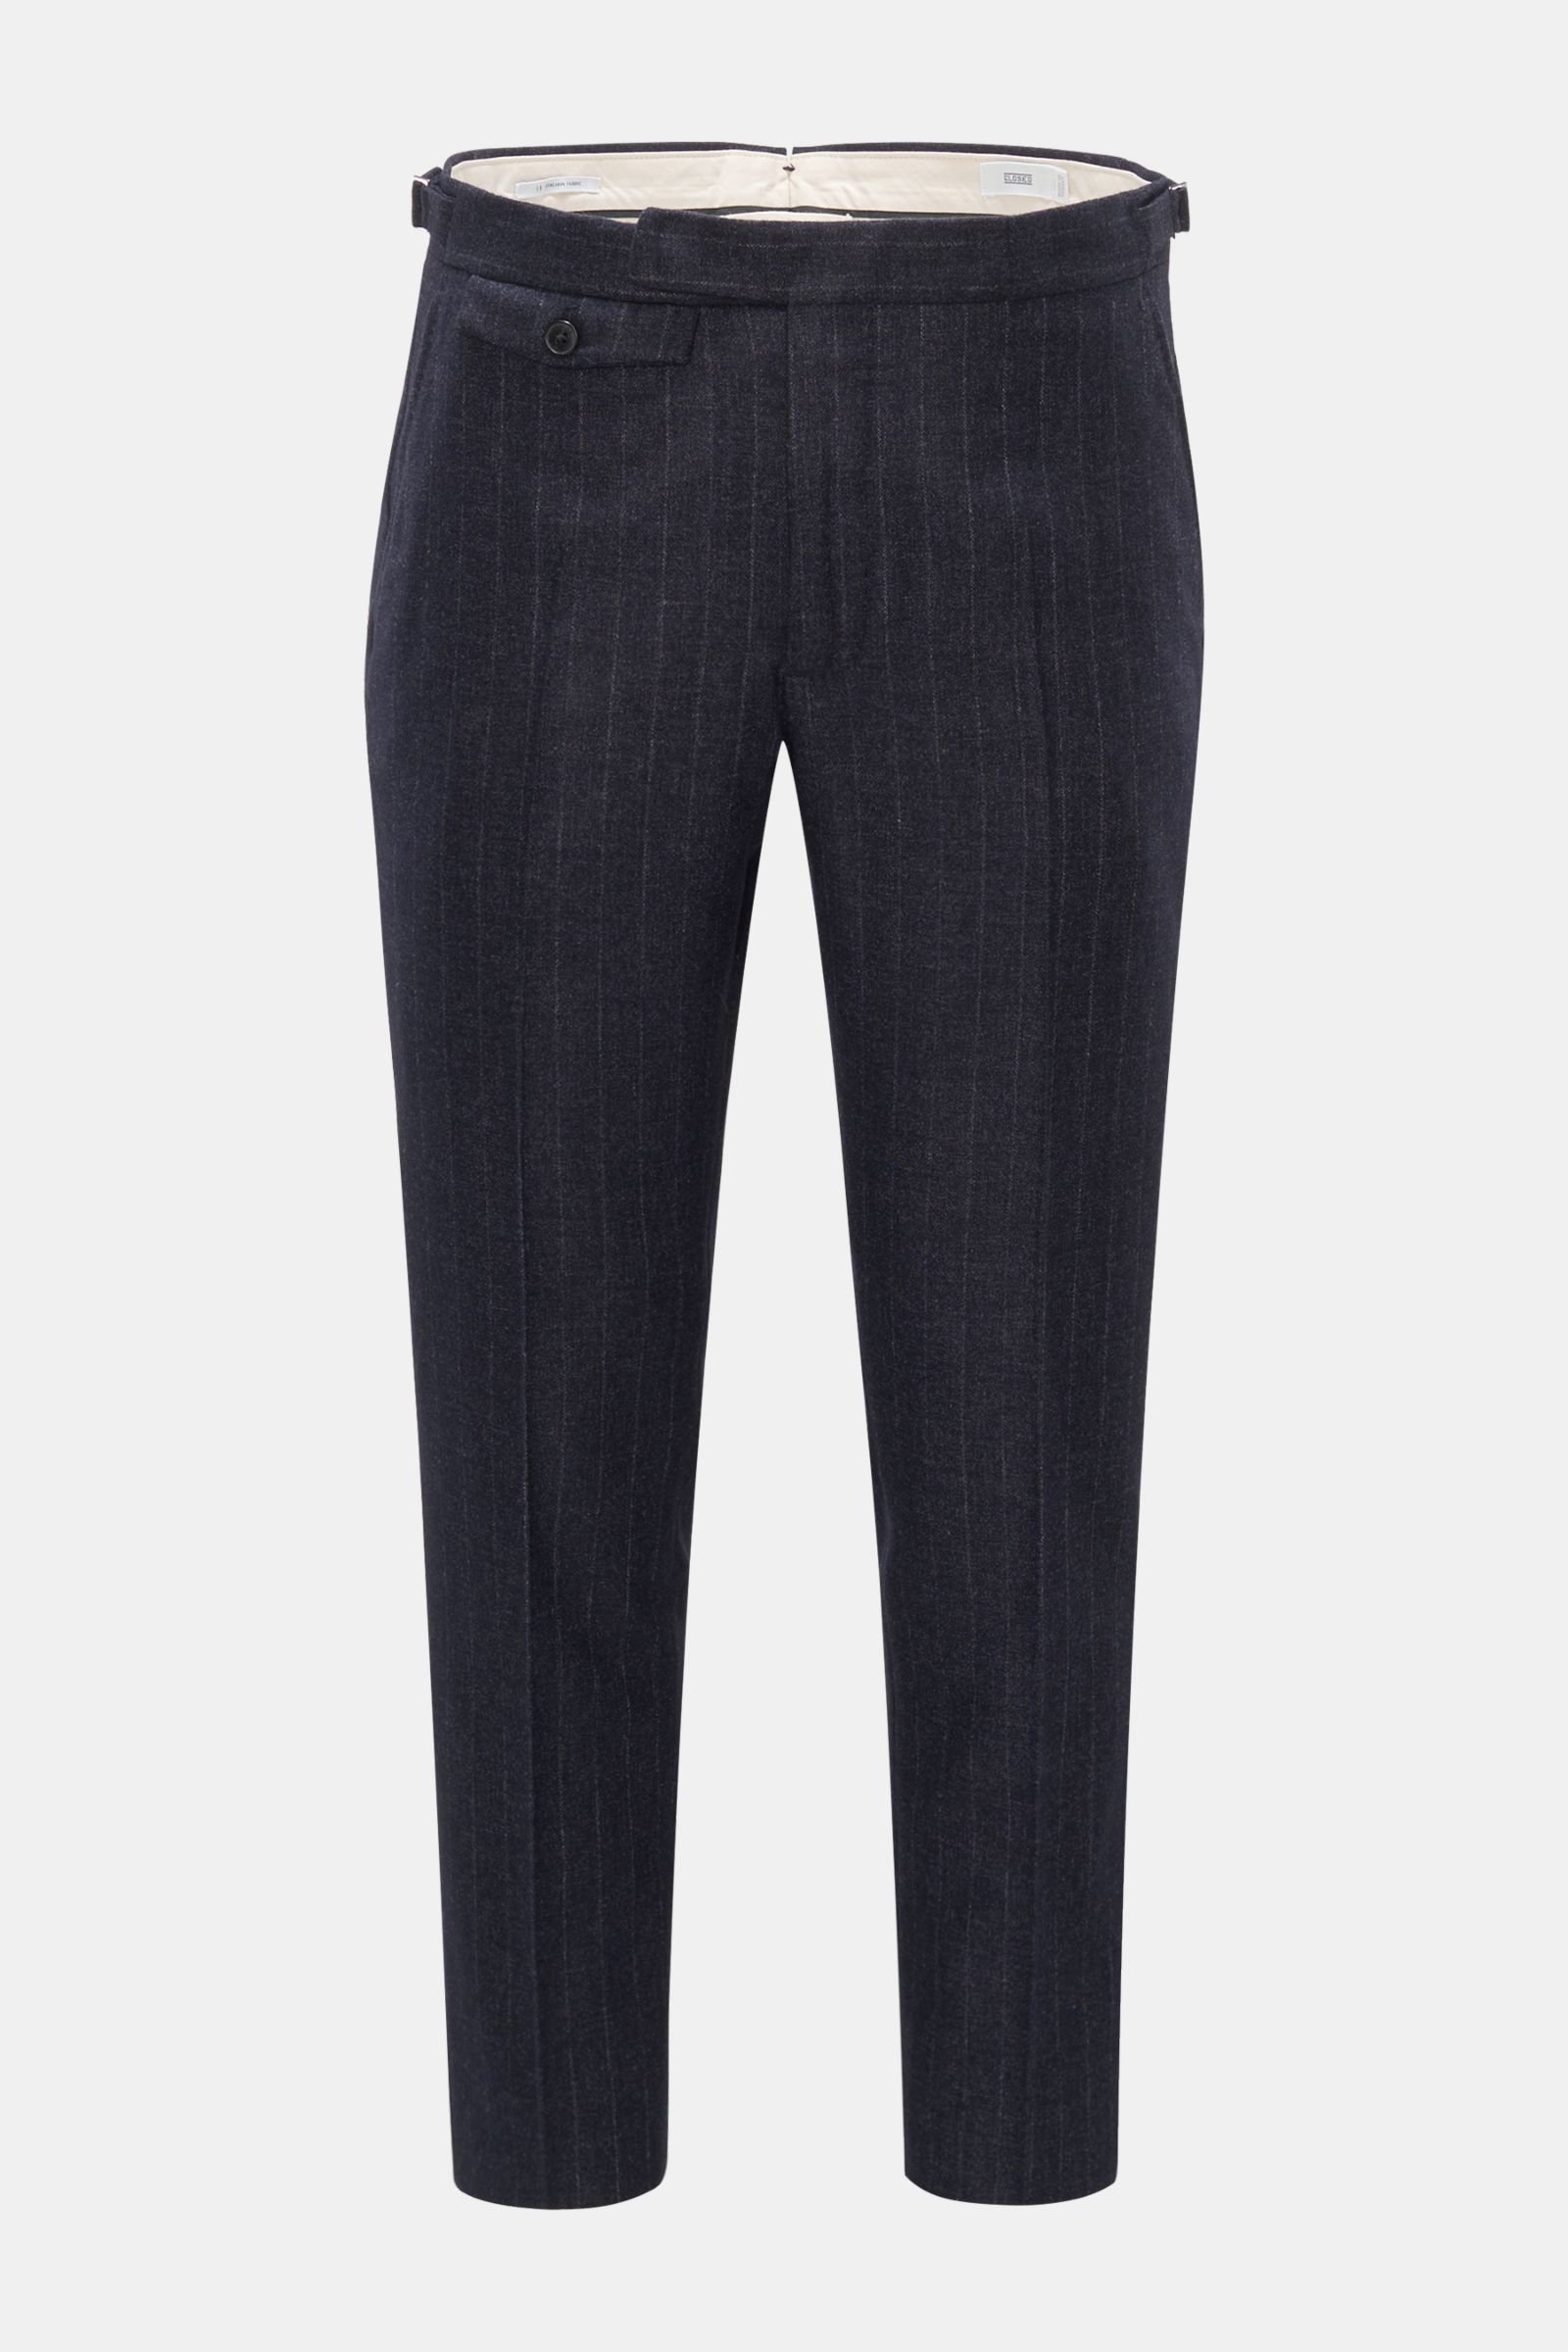 Trousers 'Atelier Formal' navy/grey striped